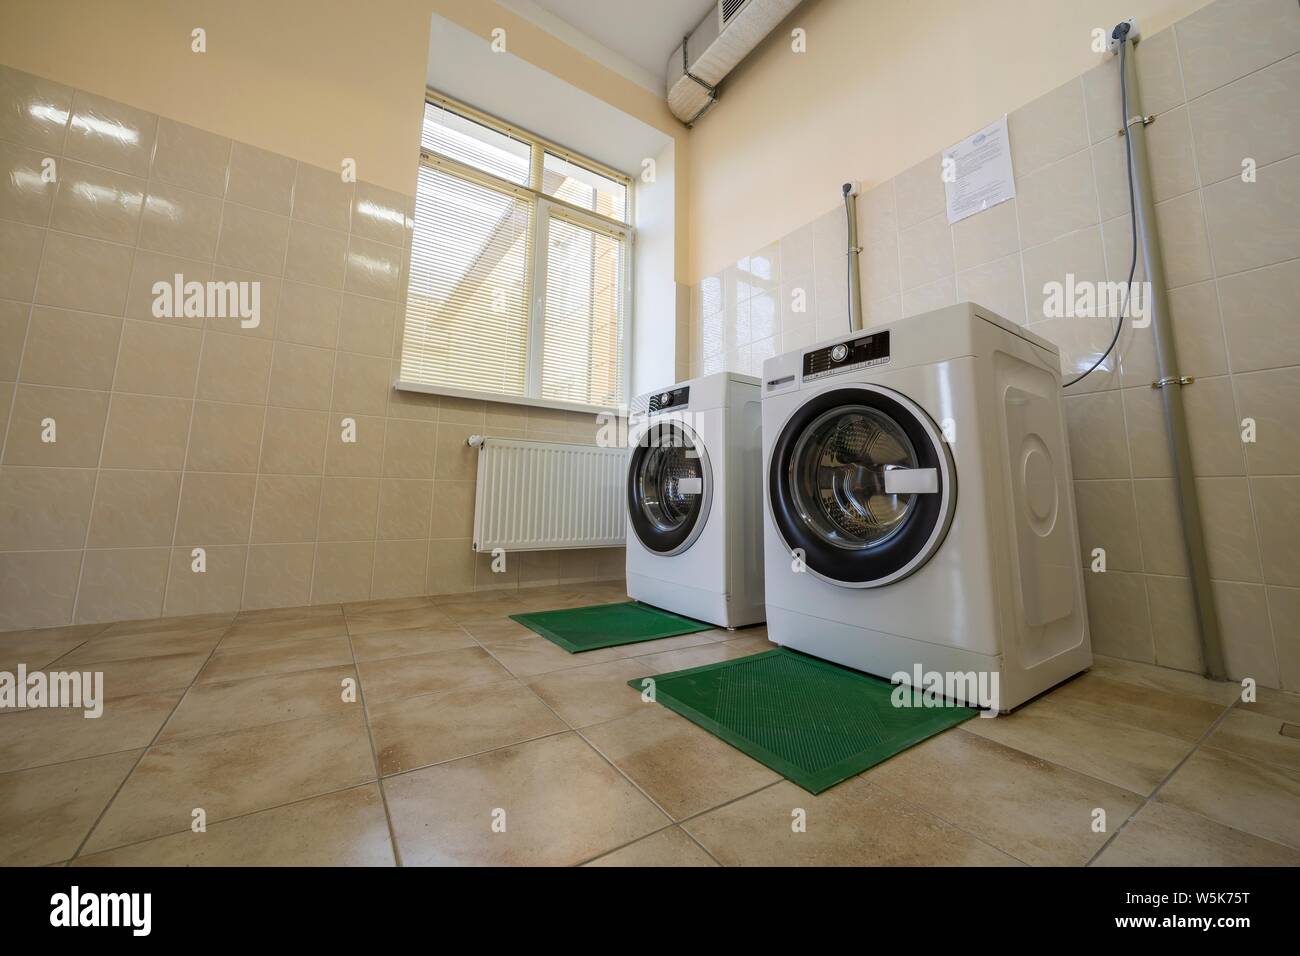 Modern new industrial washing machines on rubber insulation mats in clean  light tiled bathroom or laundry room with air ventilation system Stock  Photo - Alamy